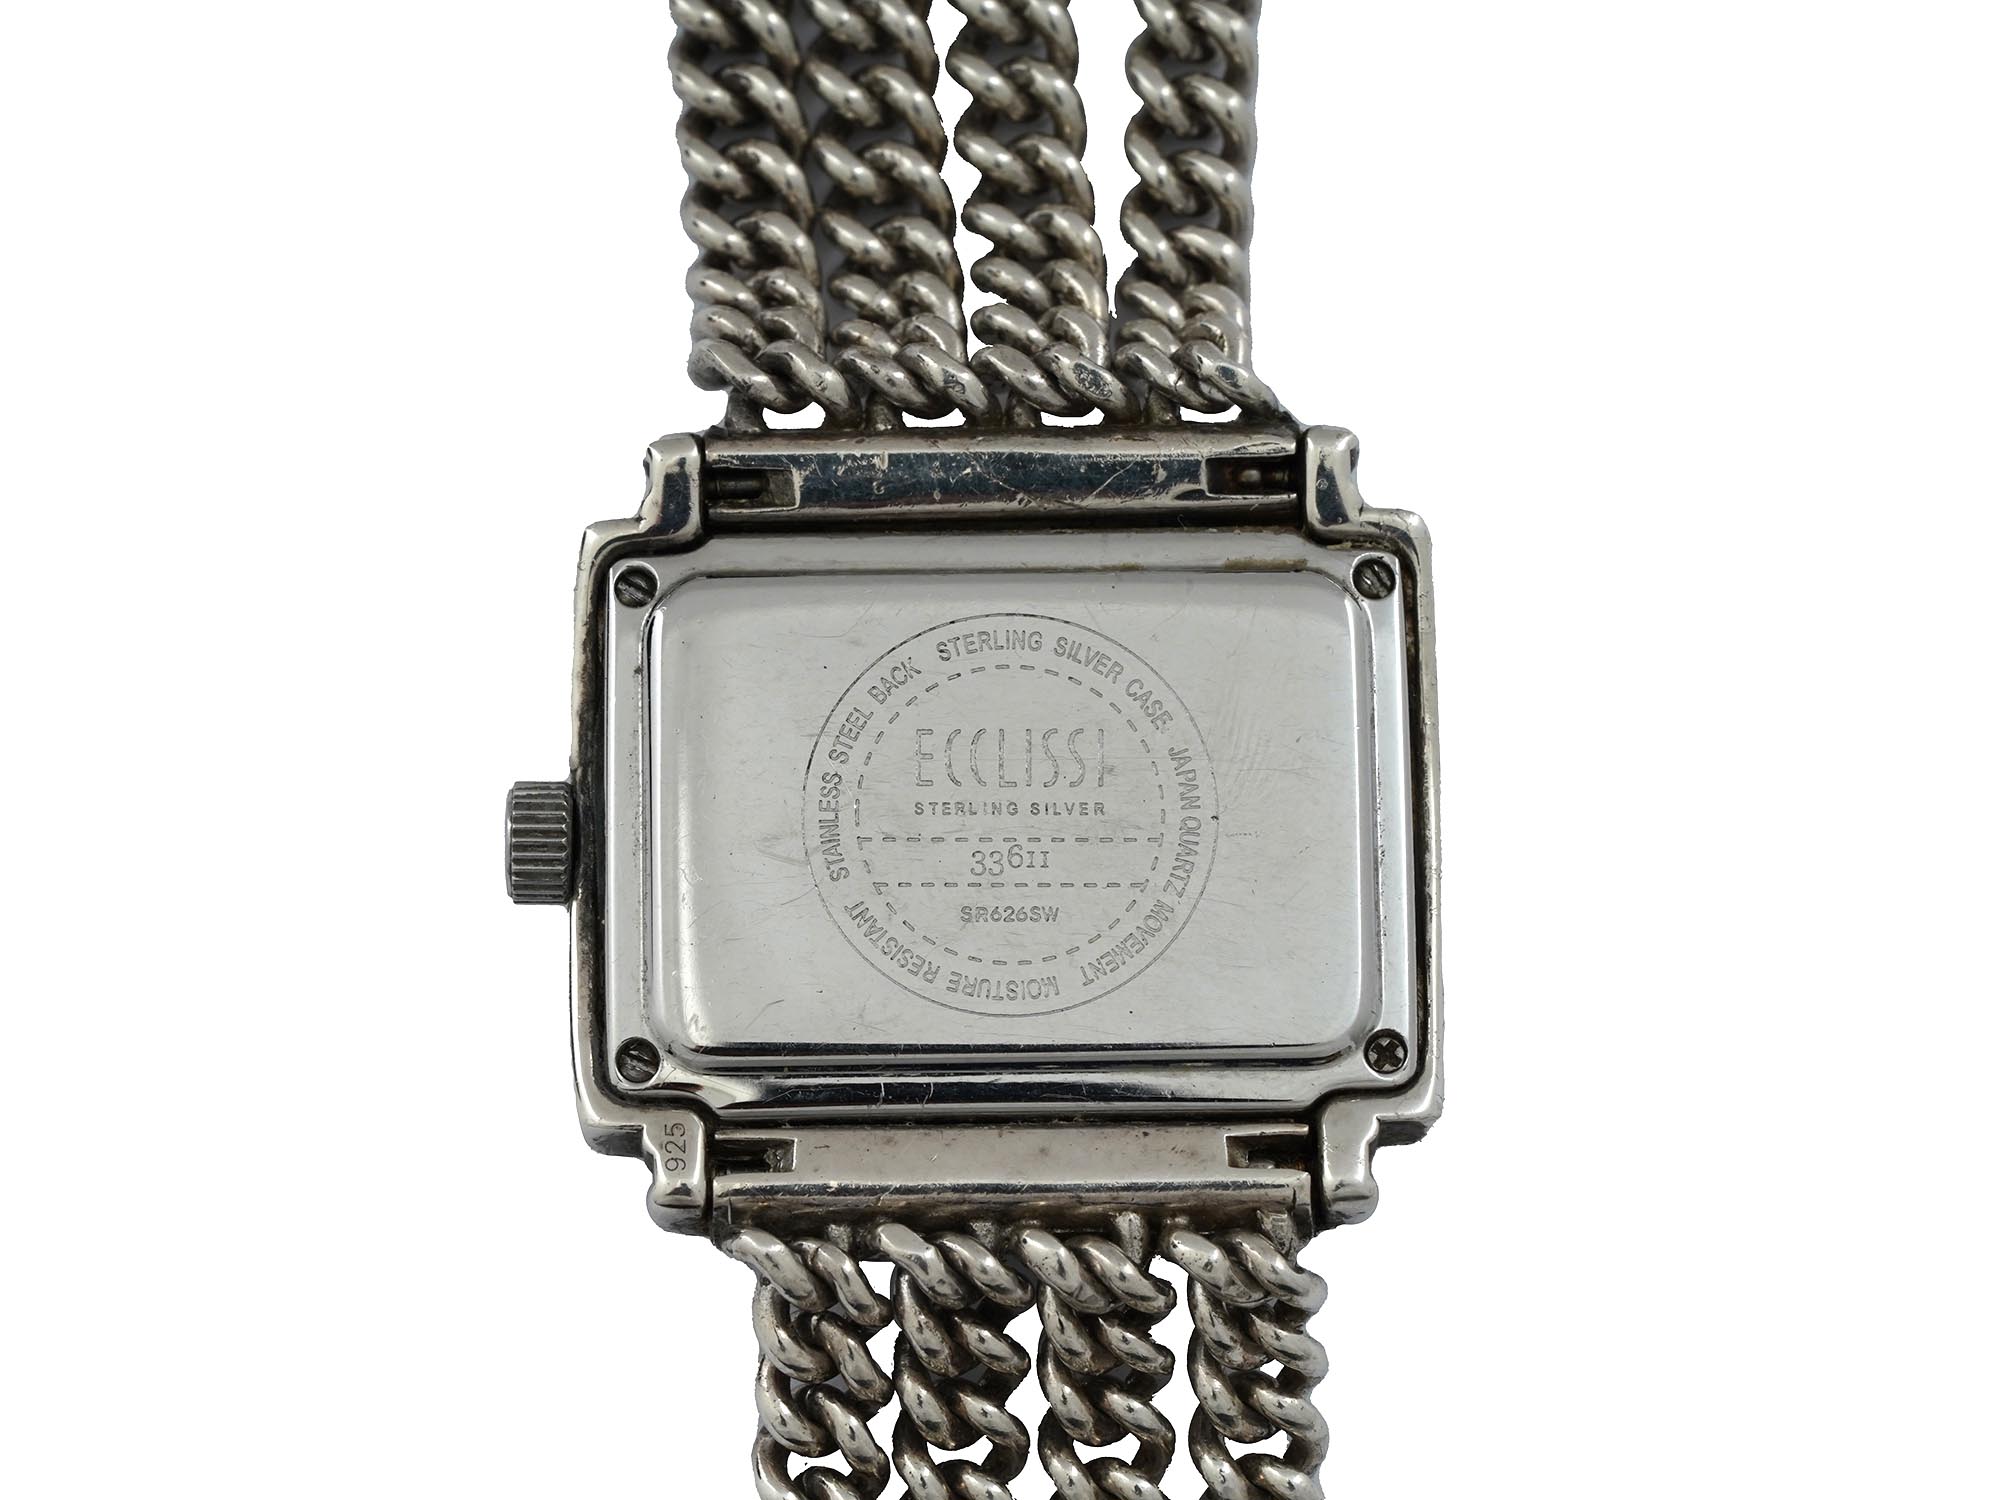 VINTAGE ECCLISSI ART DECO STERLING SILVER WATCH PIC-4